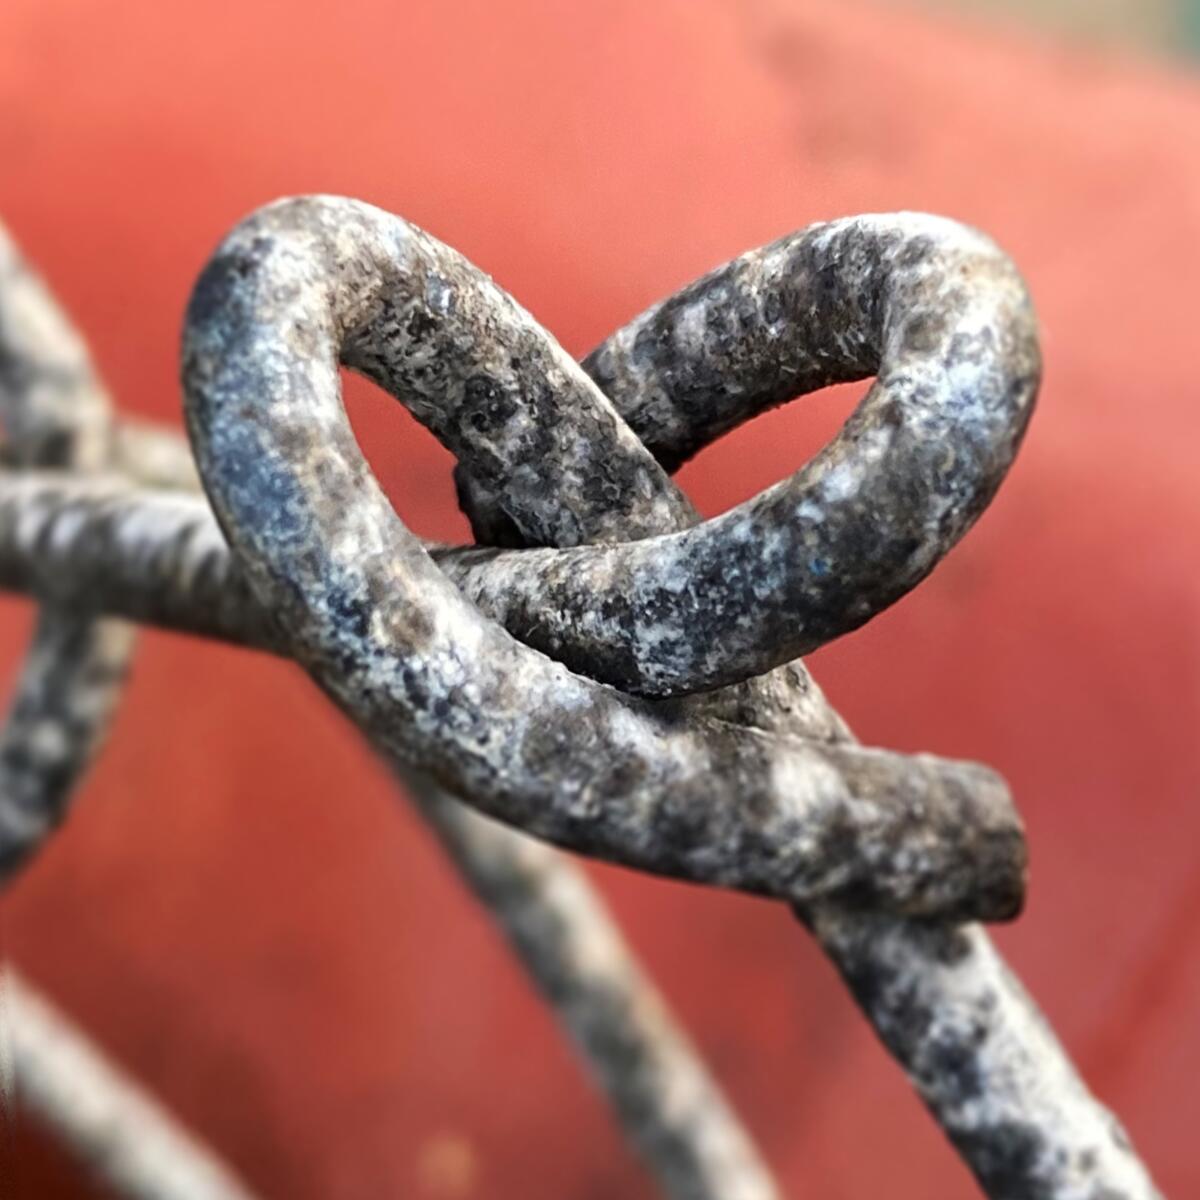 A heart-shaped portion of a chain-link fence.